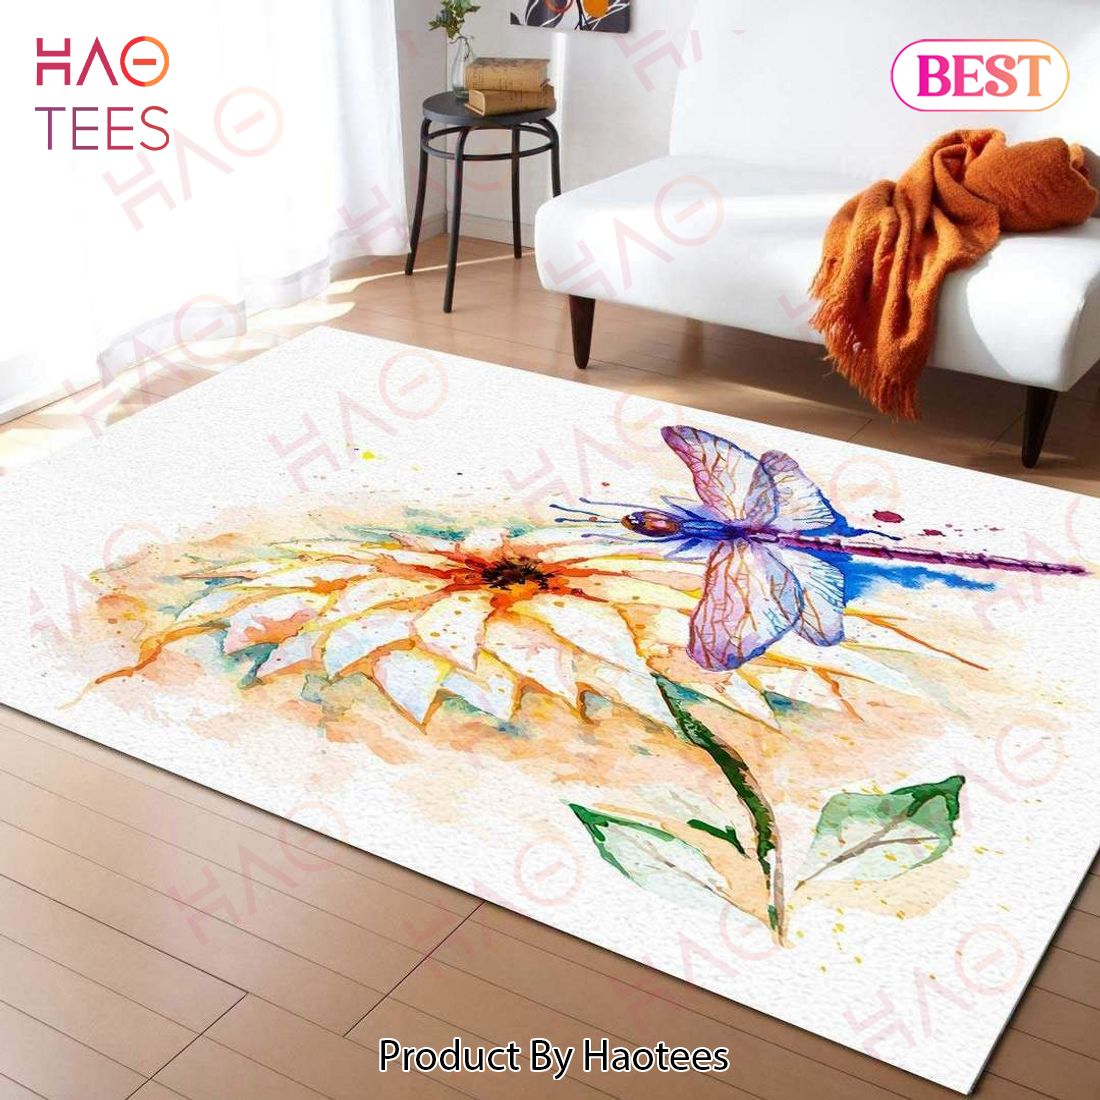 Dragonfly Limited Edition Area Rugs Carpet Mat Kitchen Rugs Floor Decor – GJ41